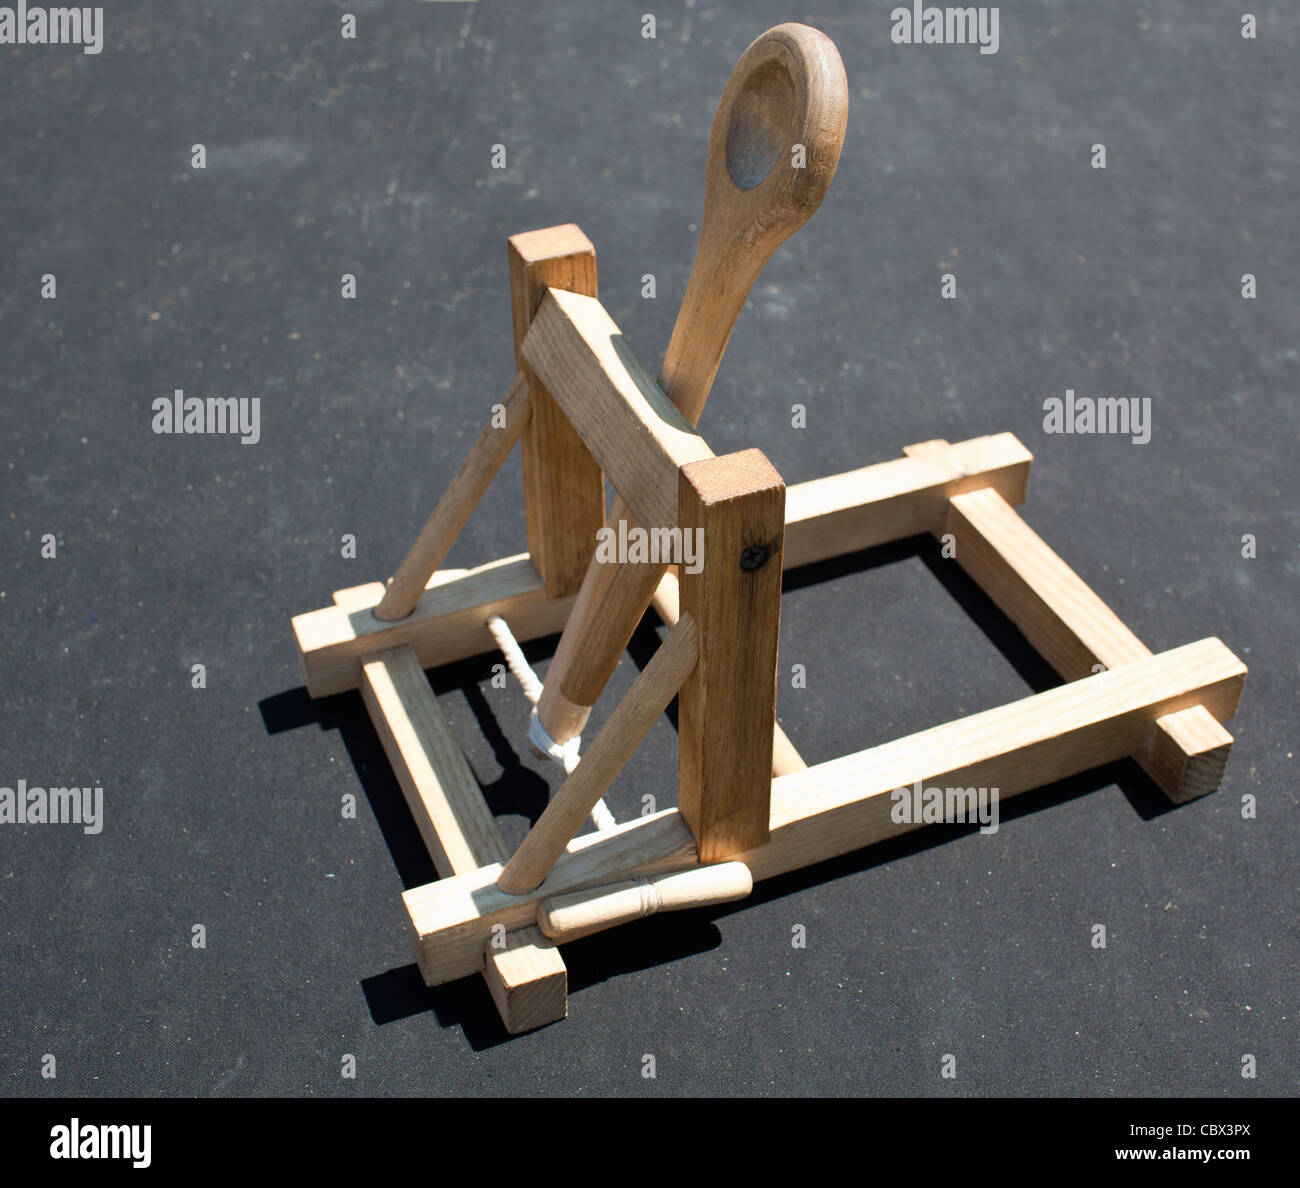 Wooden catapult toy on dark background Stock Photo